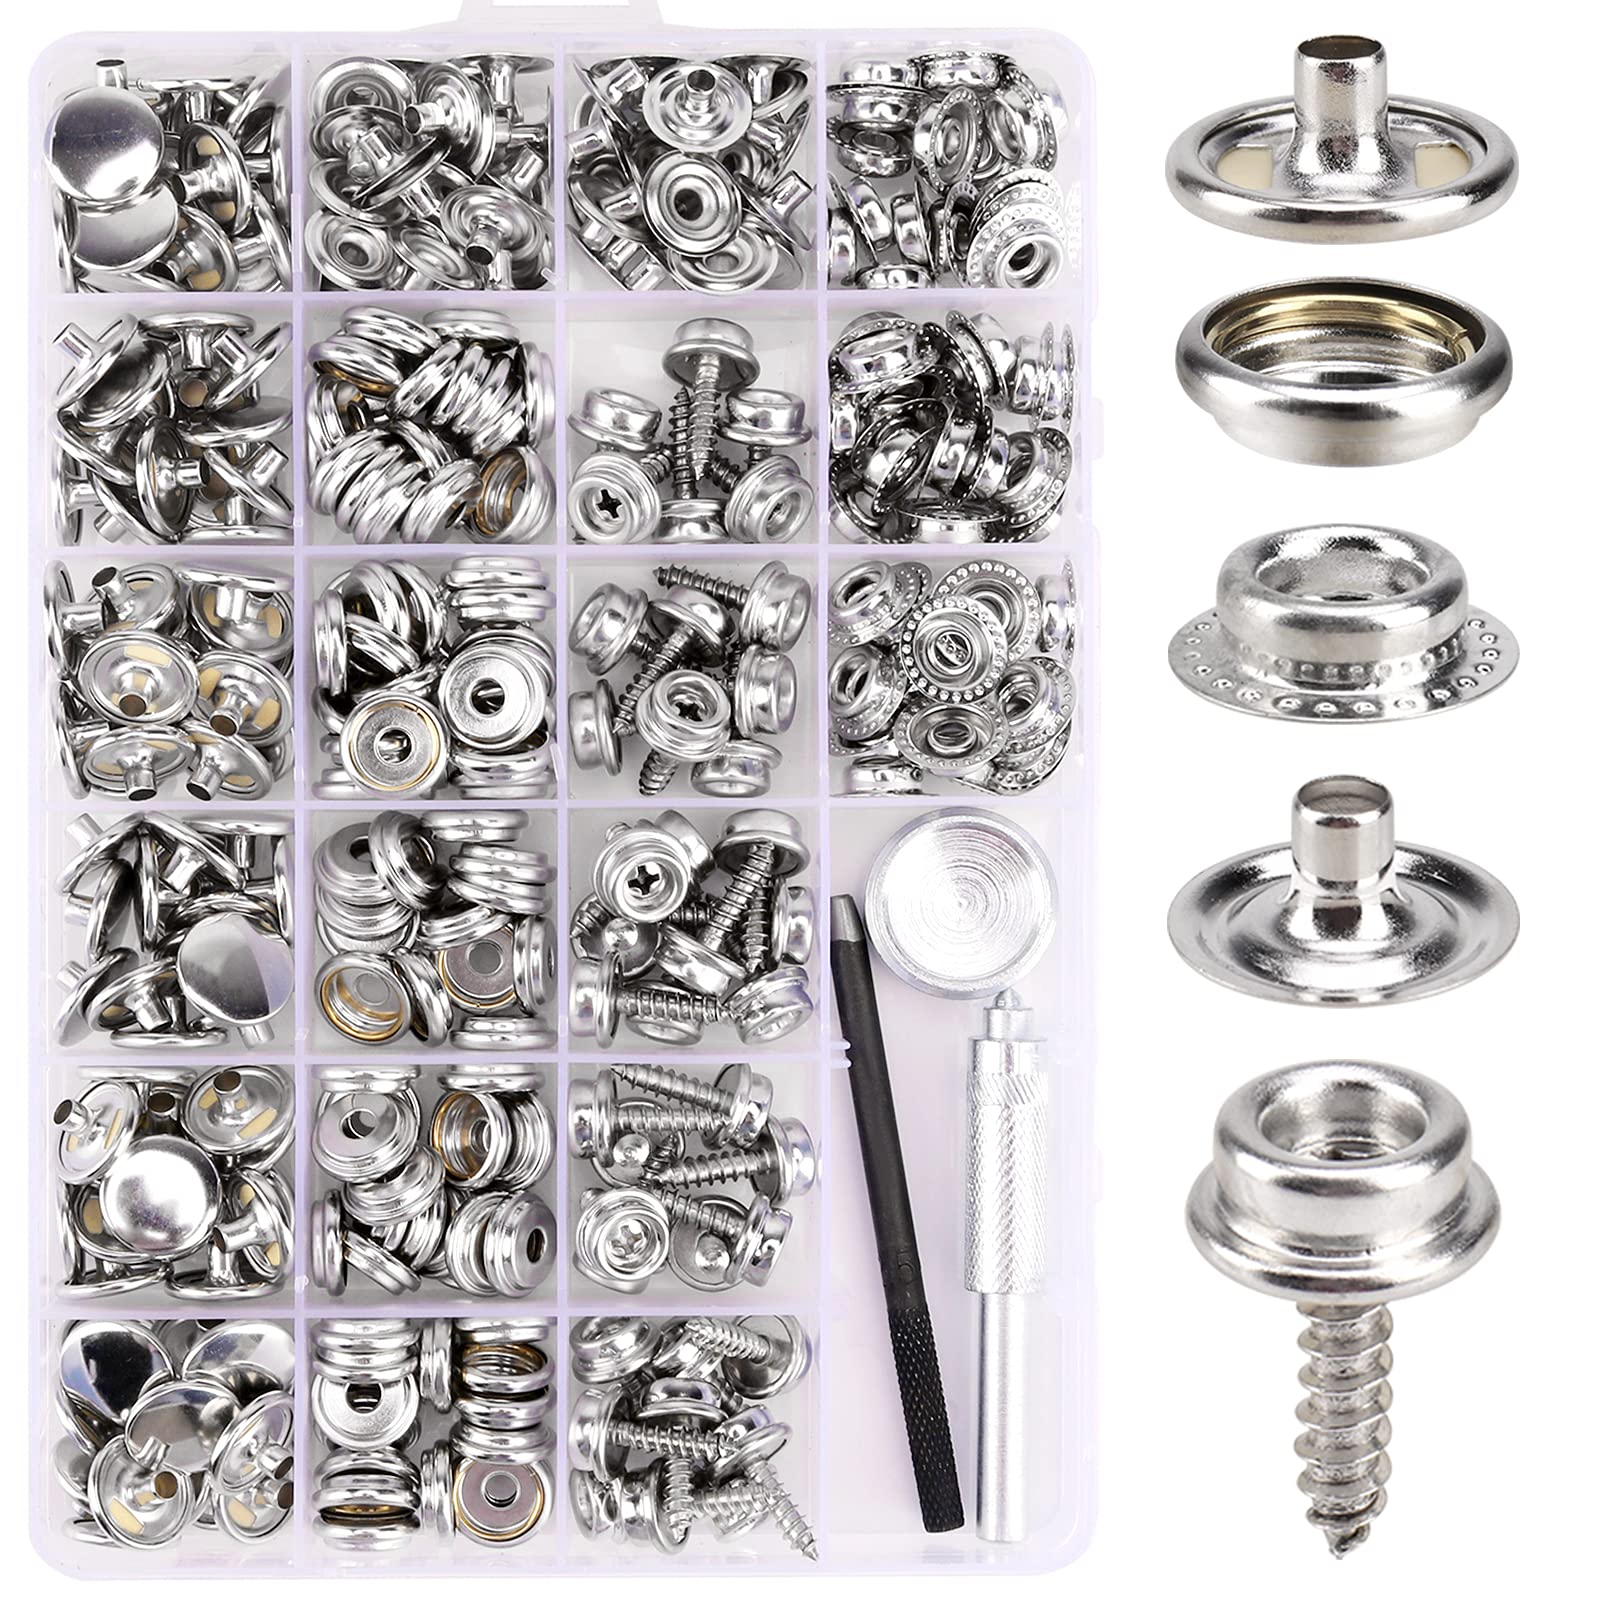 323 Piece Canvas Snap Kit Meifuly Marine Grade Stainless Steel (Caps  Sockets Screws Fabric Base Components) for DIY Cover Canvas Snap Kit with  Material Hole Punch and Setting Tools